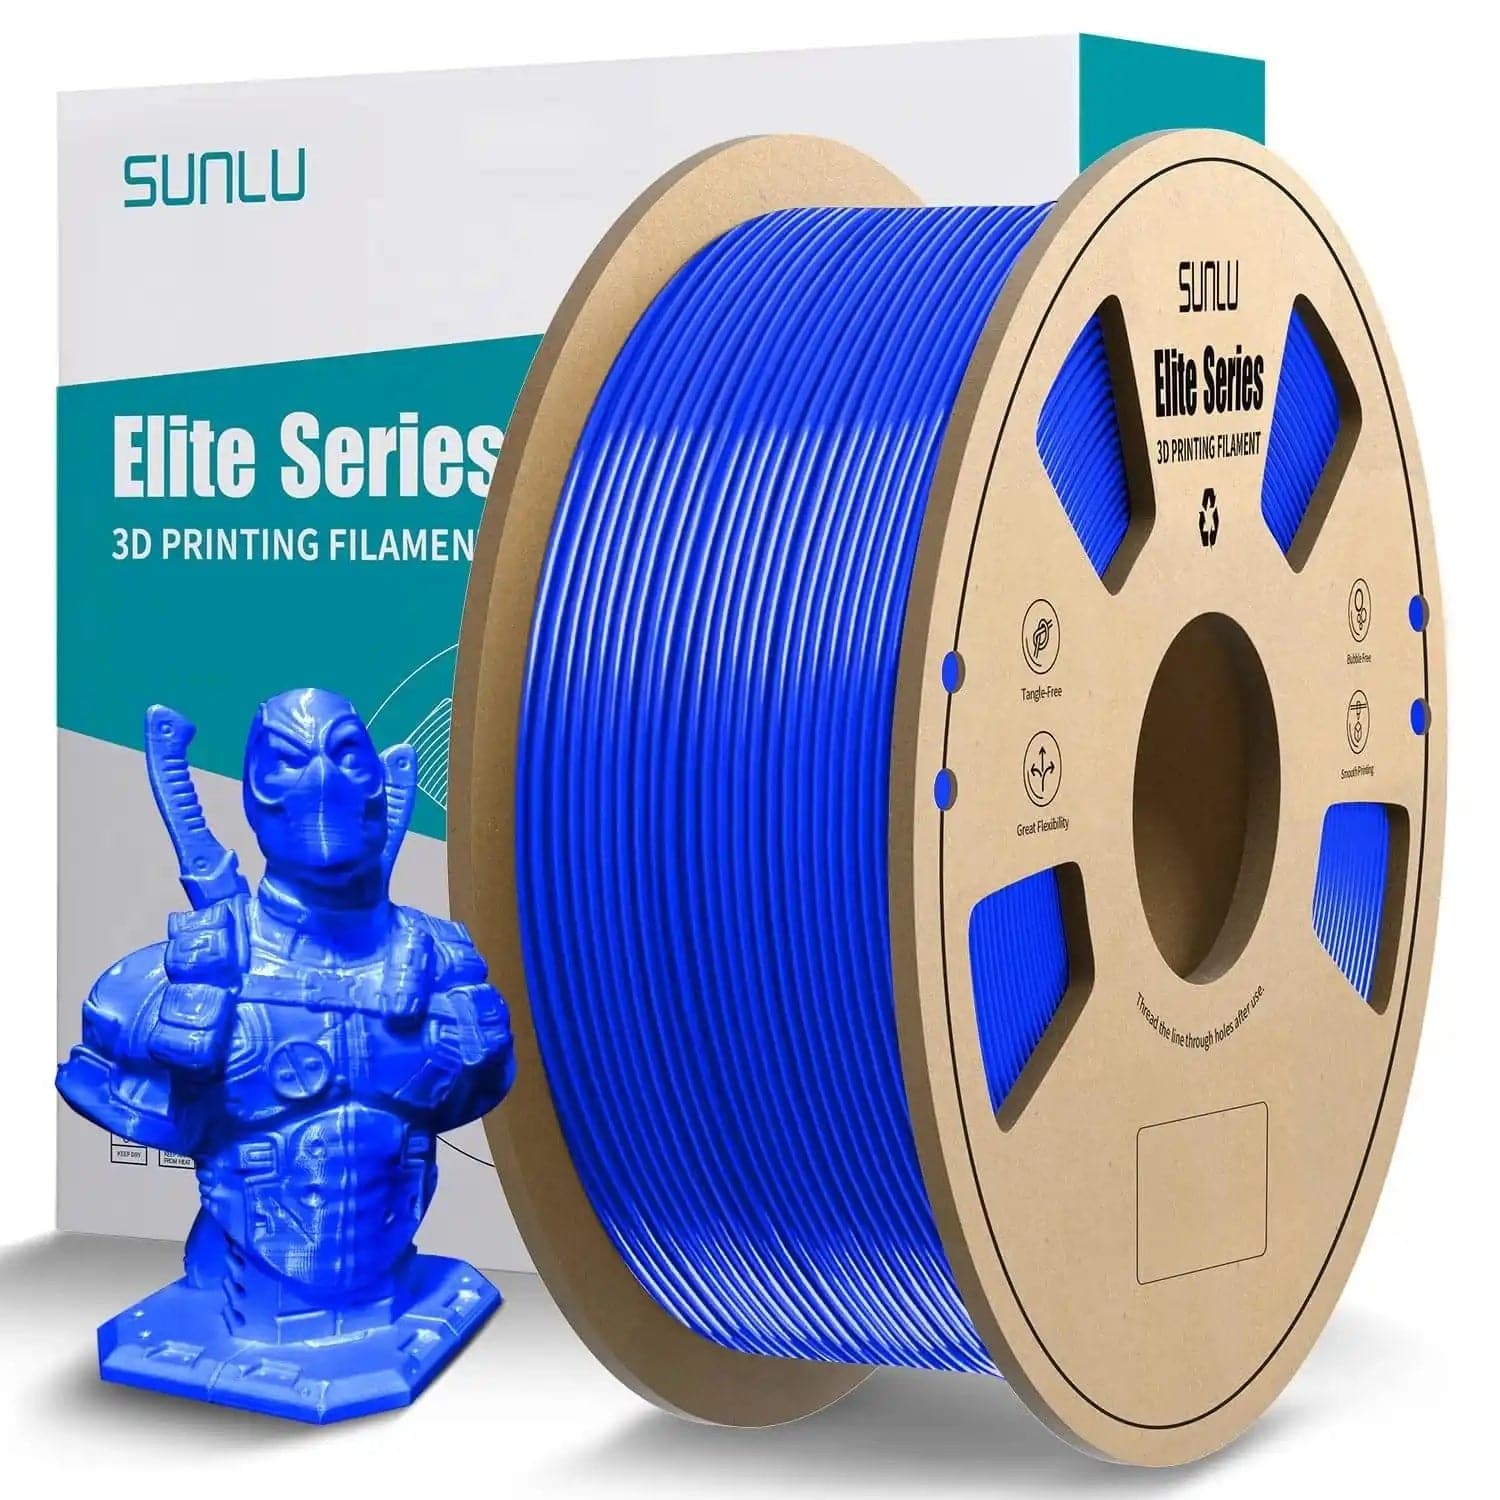 SUNLU Elite PETG Filament 1.75mm 1KGFeatures:


✅【Ship From Amazon FBA Warehouse】Same shipping service with Amazon. Enjoy reliable performance and fast shipping with the Amazon FBA Warehouse.
✅【High-QuSUNLU Elite PETG Filament 13D Printing Materials